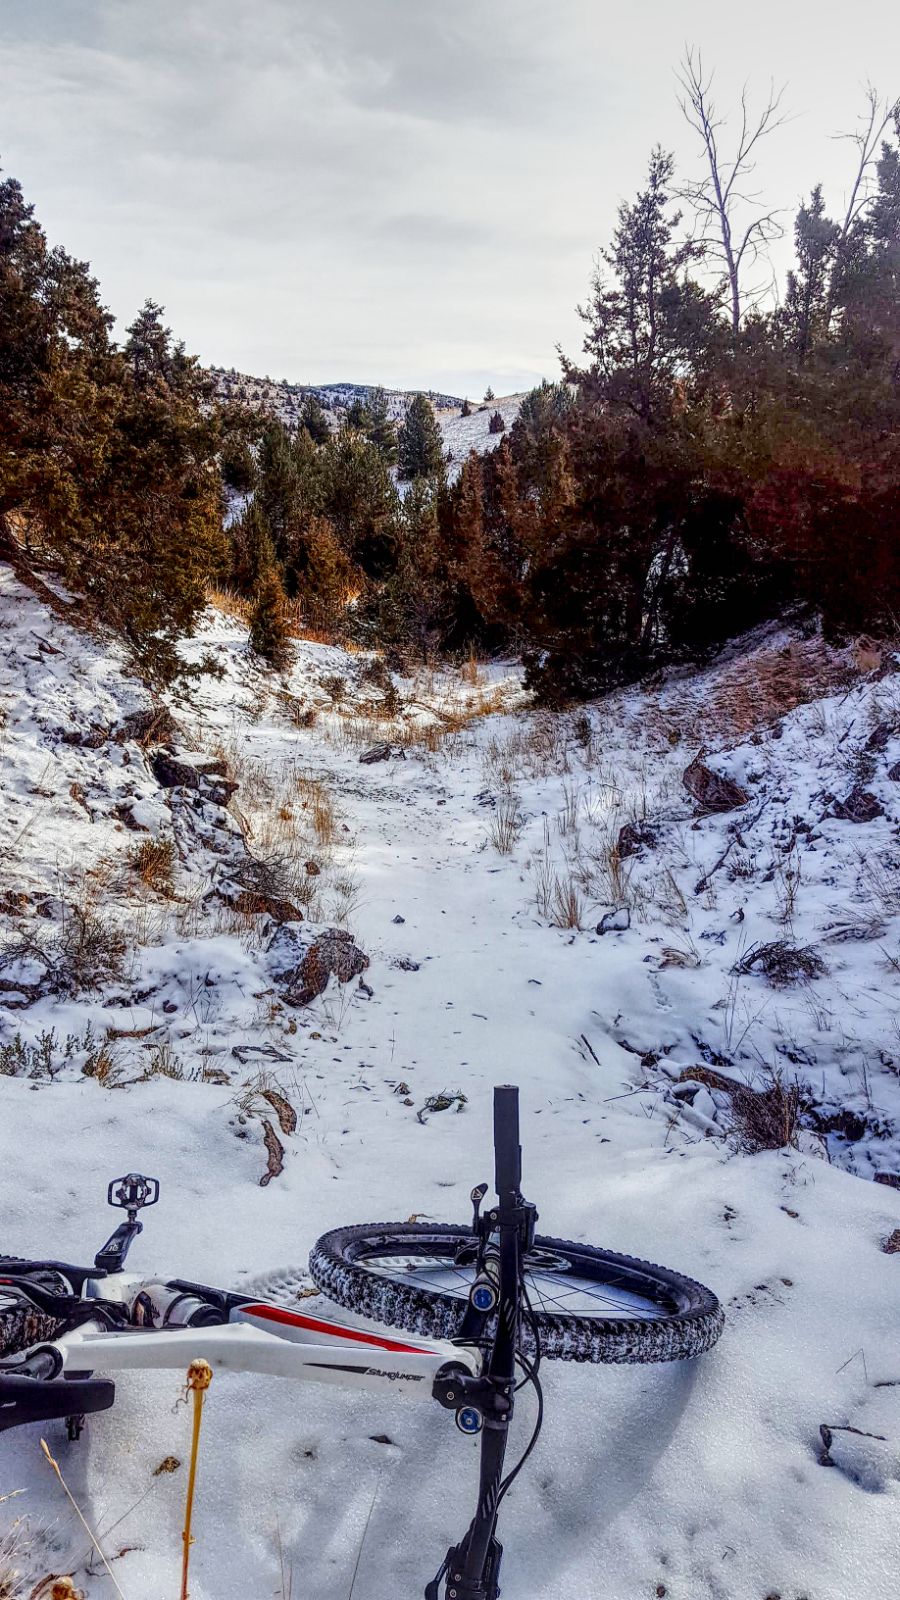 Mountain bike in the winter on a snowy trail